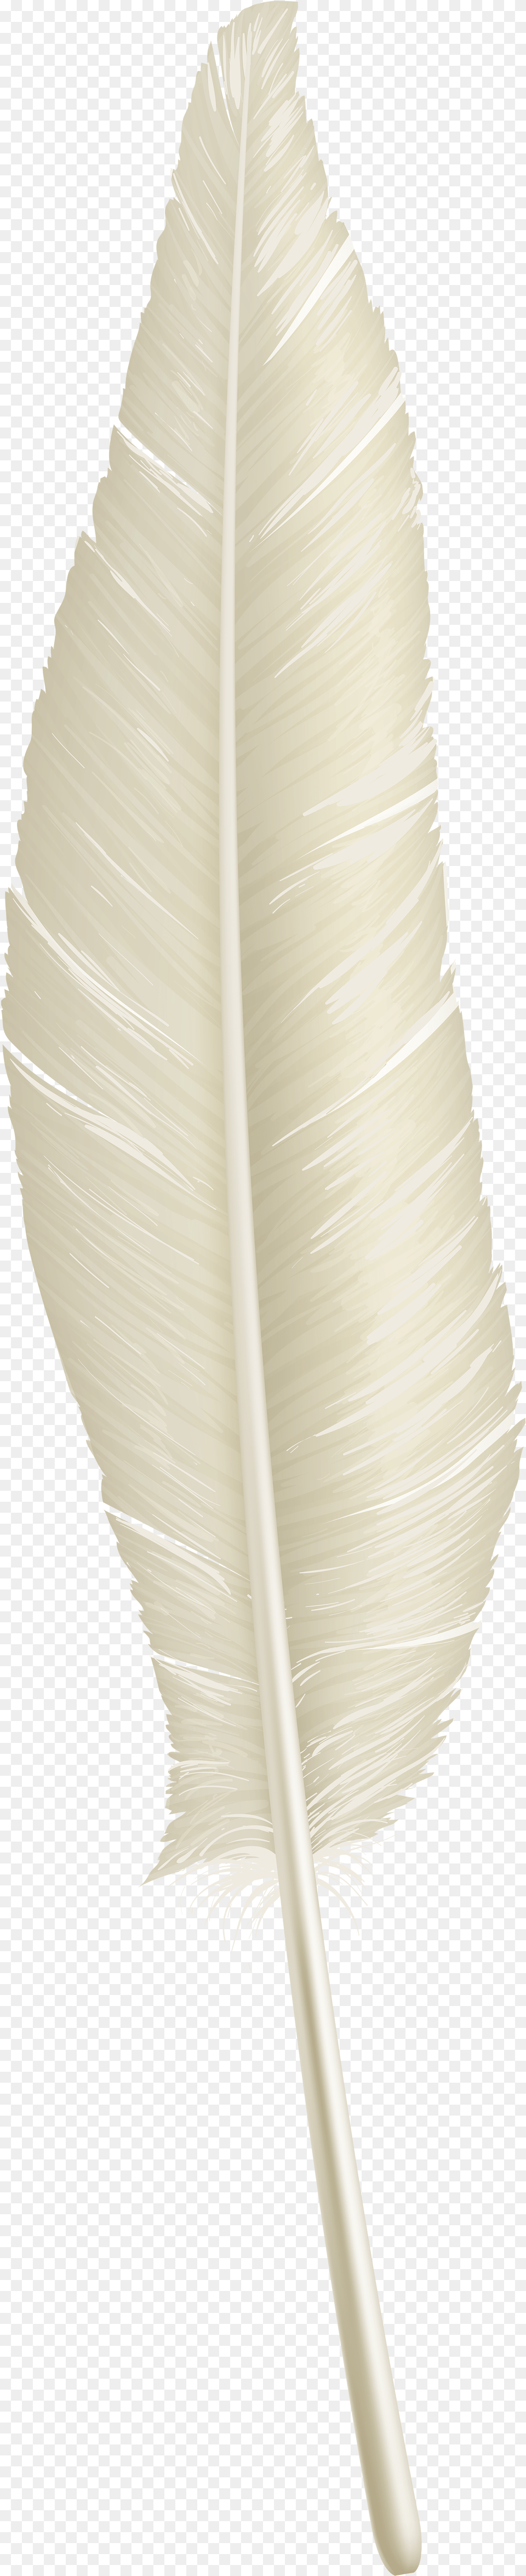 White Feather Gown, Bottle, Brush, Device, Tool Png